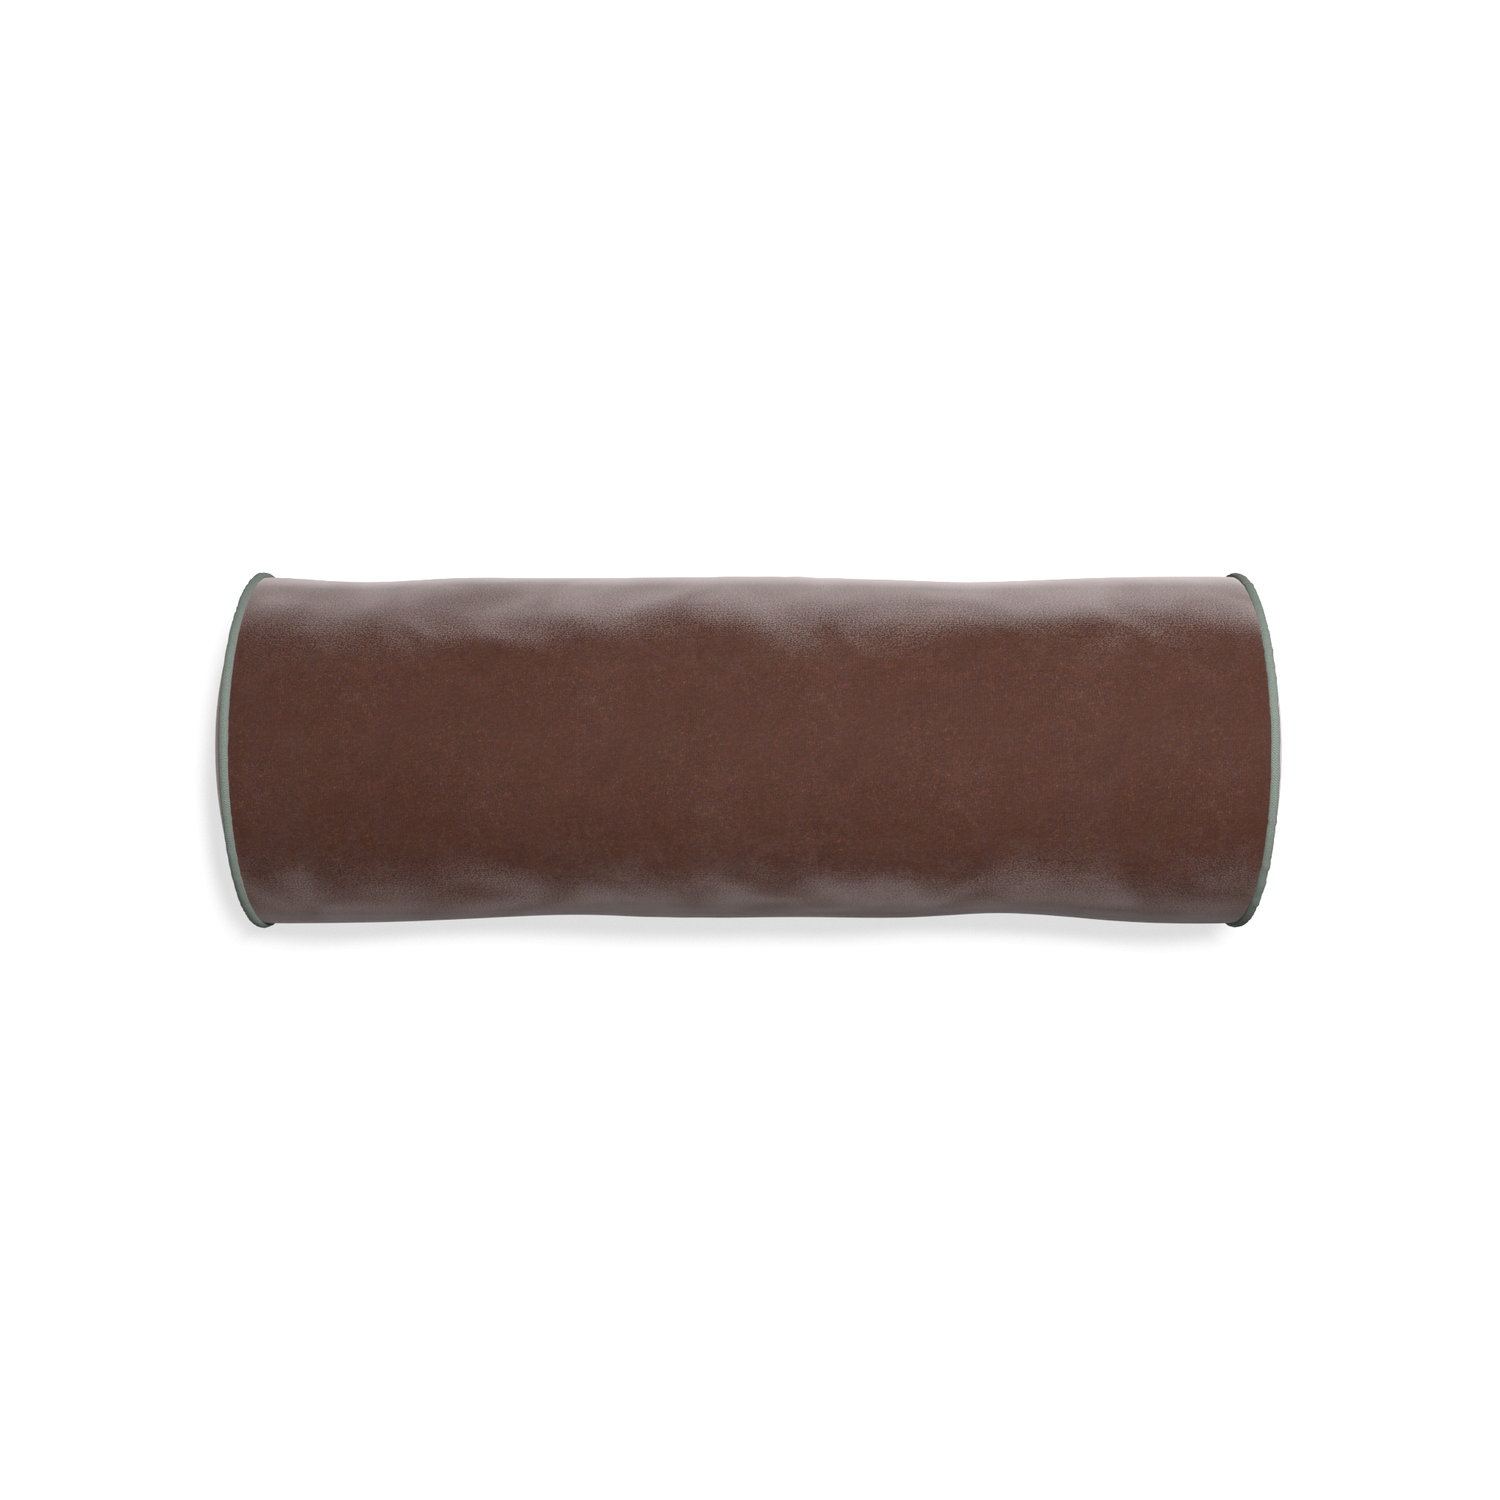 Bolster walnut velvet custom brownpillow with sage piping on white background